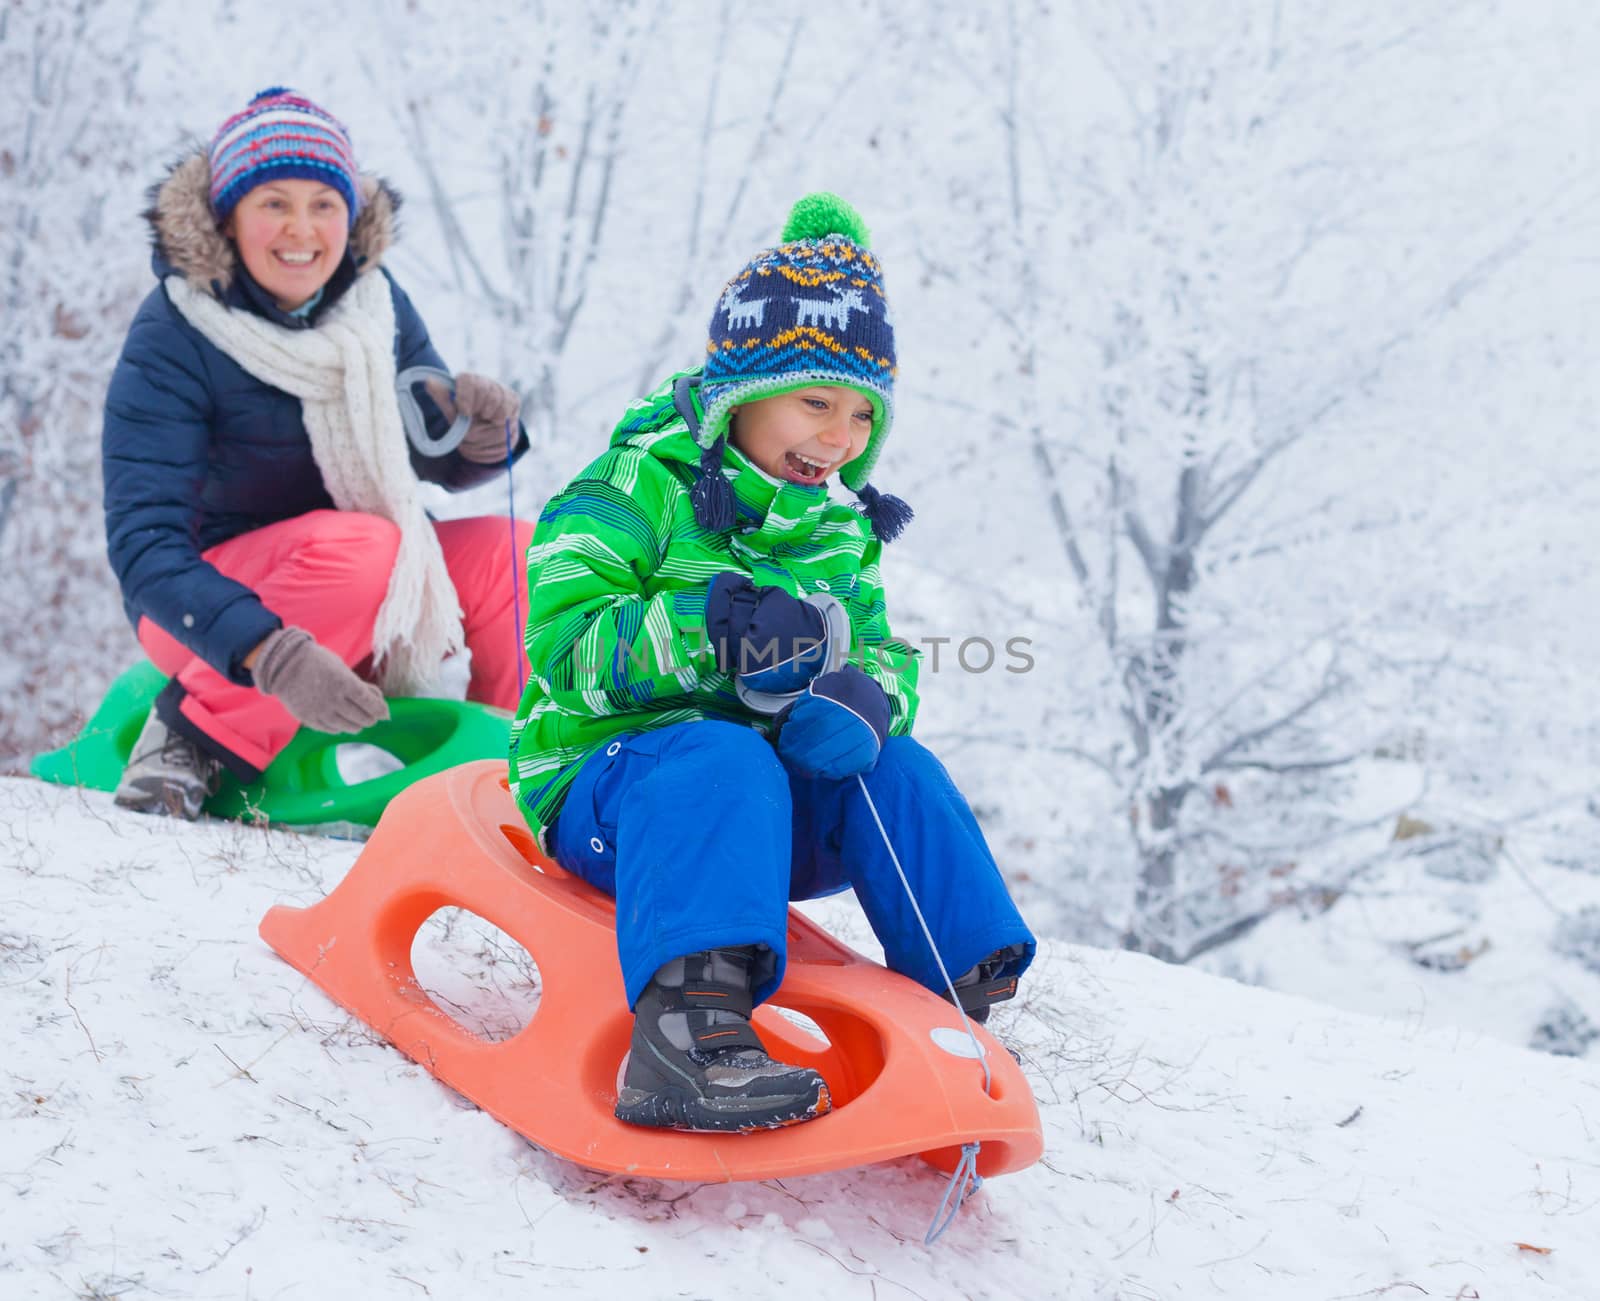 Winter, play, fun - Cute little boy and his mother having fun with sled in winter park